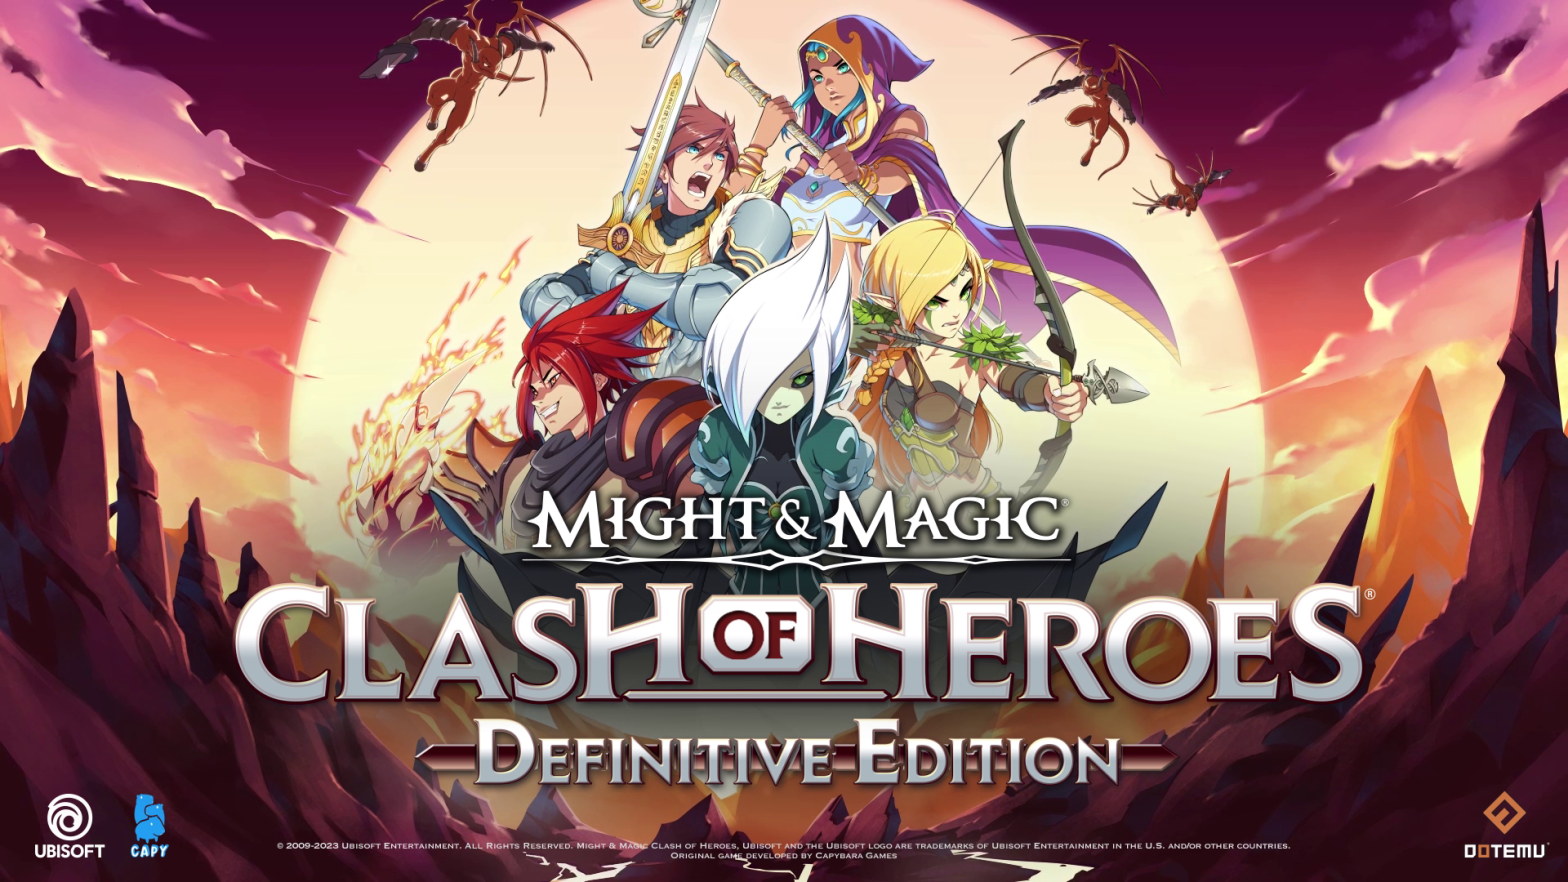 Might & Magic: Clash of Heroes - Definitive Edition now available on PC and consoles!